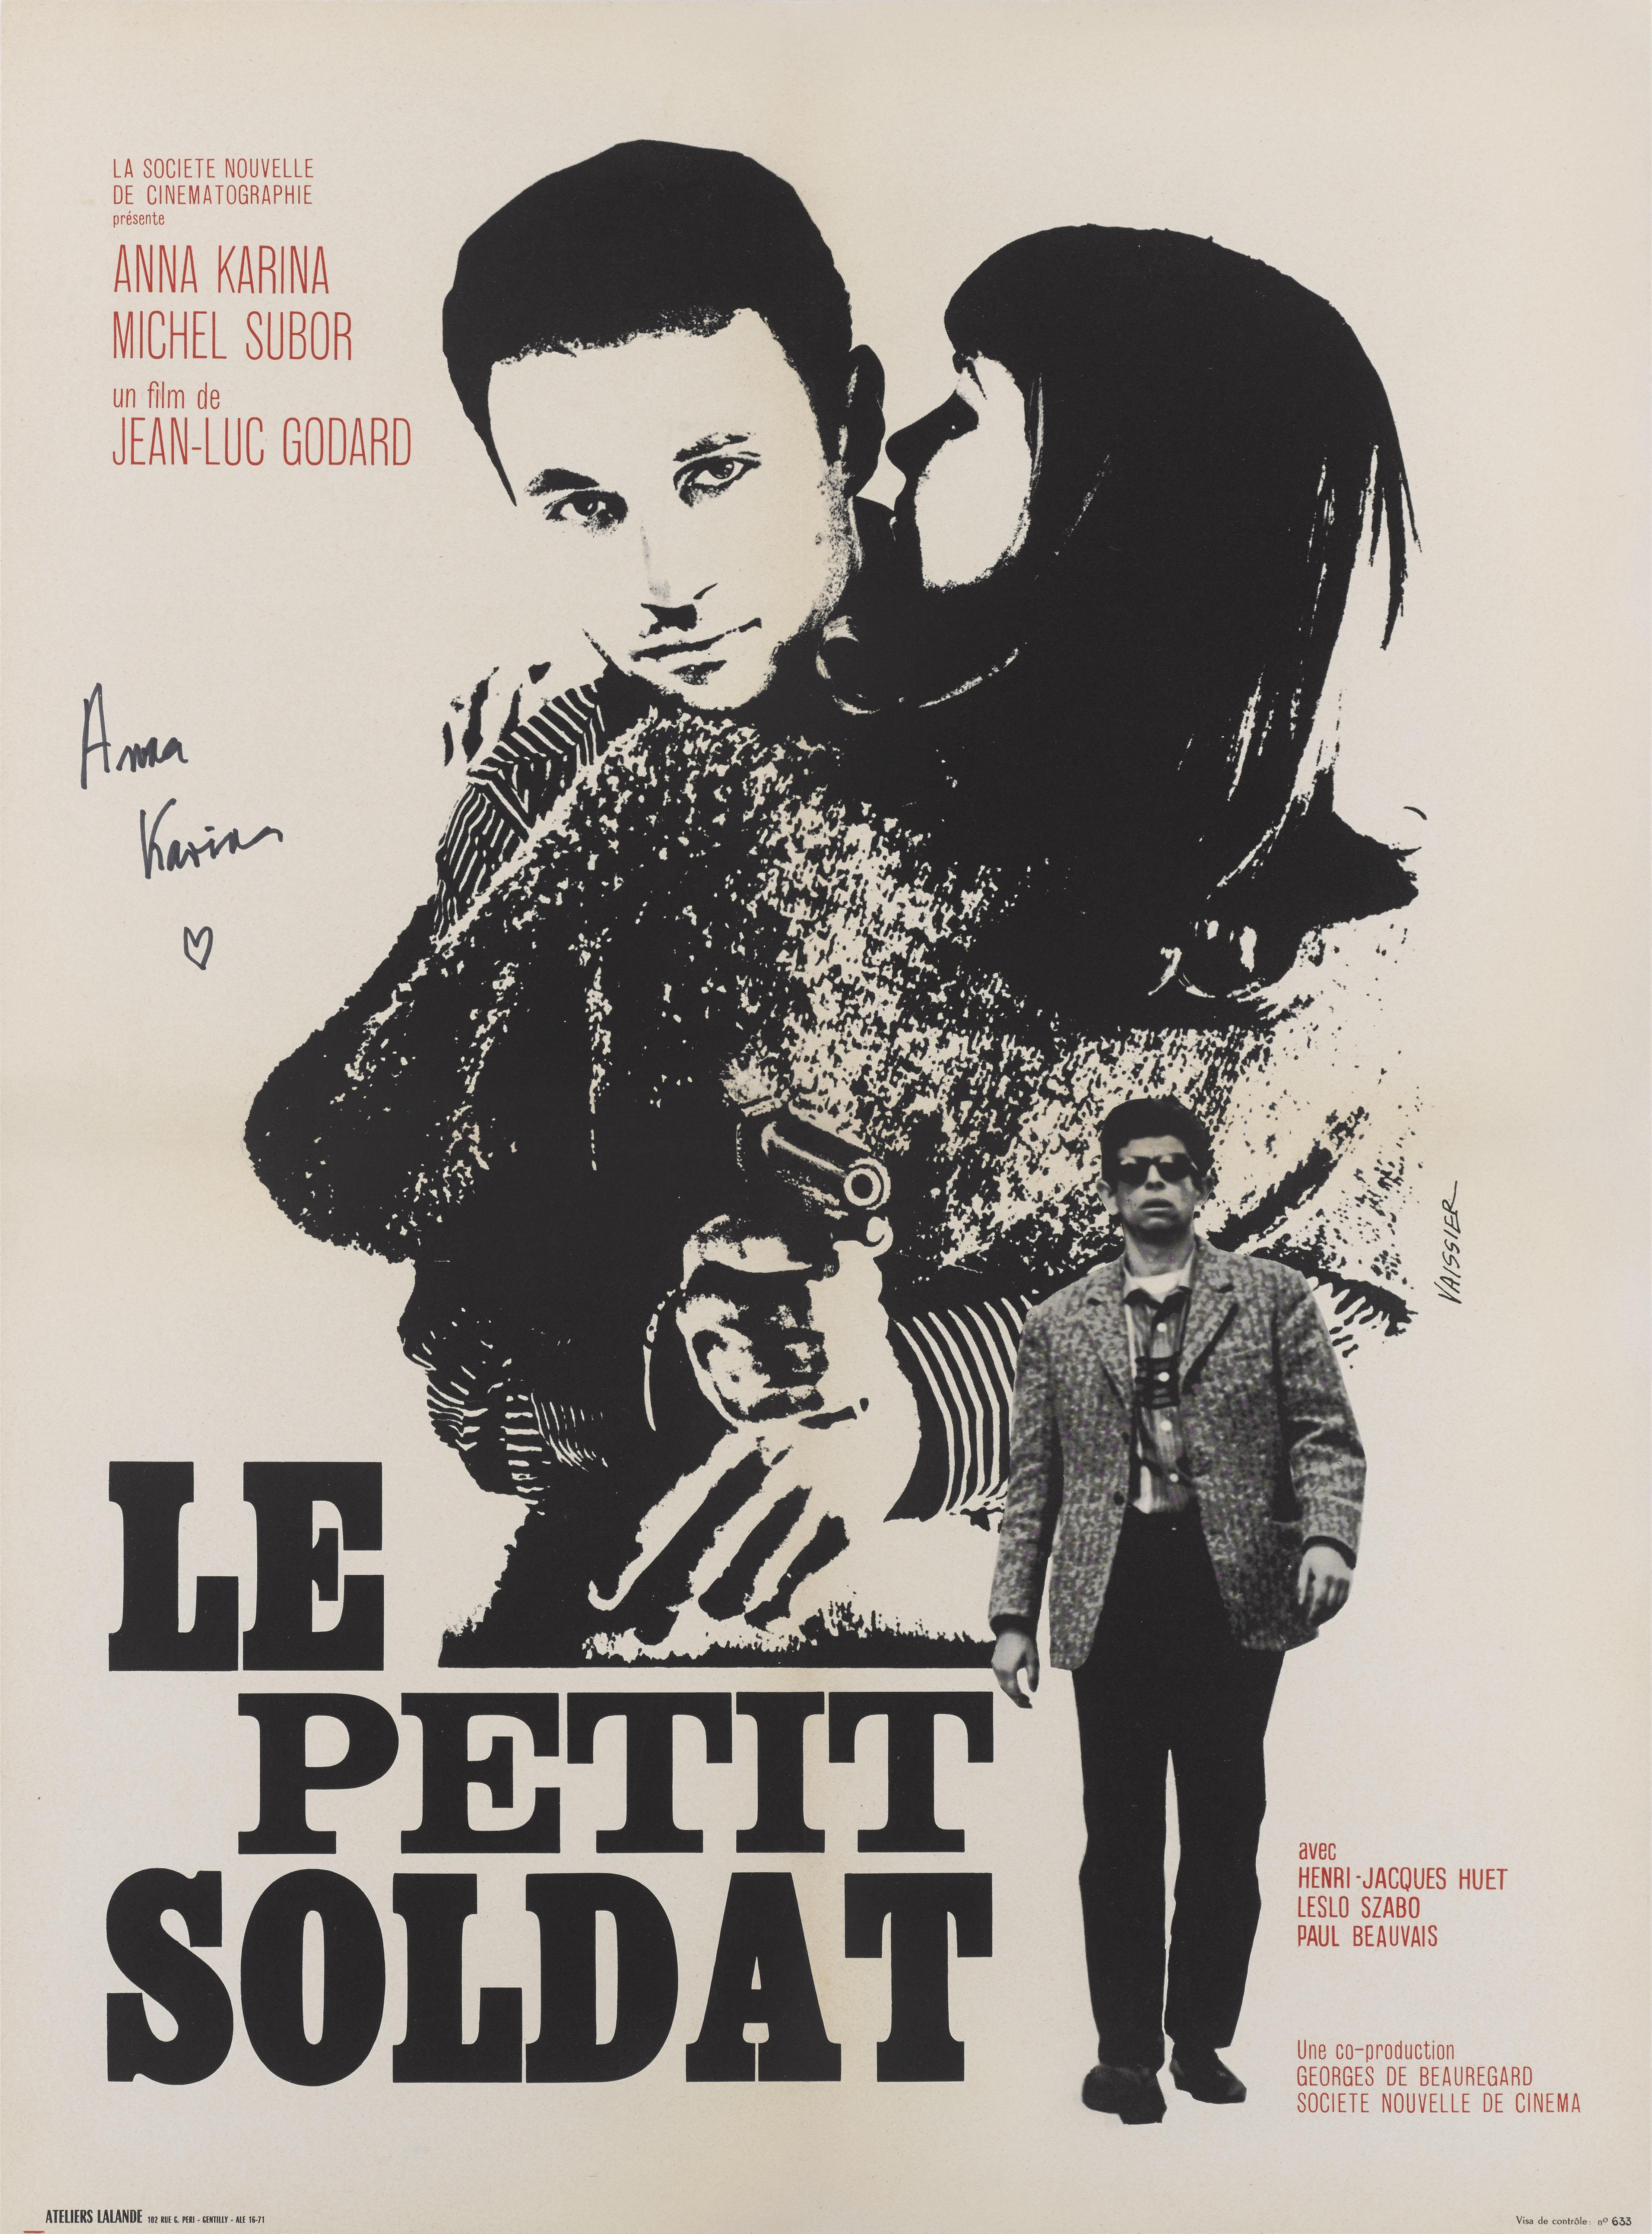 Original French film poster for Le Petit Soldat the 1963 French New Wave film that was written and directed by Jean-Luc Godard, and stars Anna Karina, Michel Subor and Henri-Jacques Huet. The film is set during the Algerian War, and tells the story